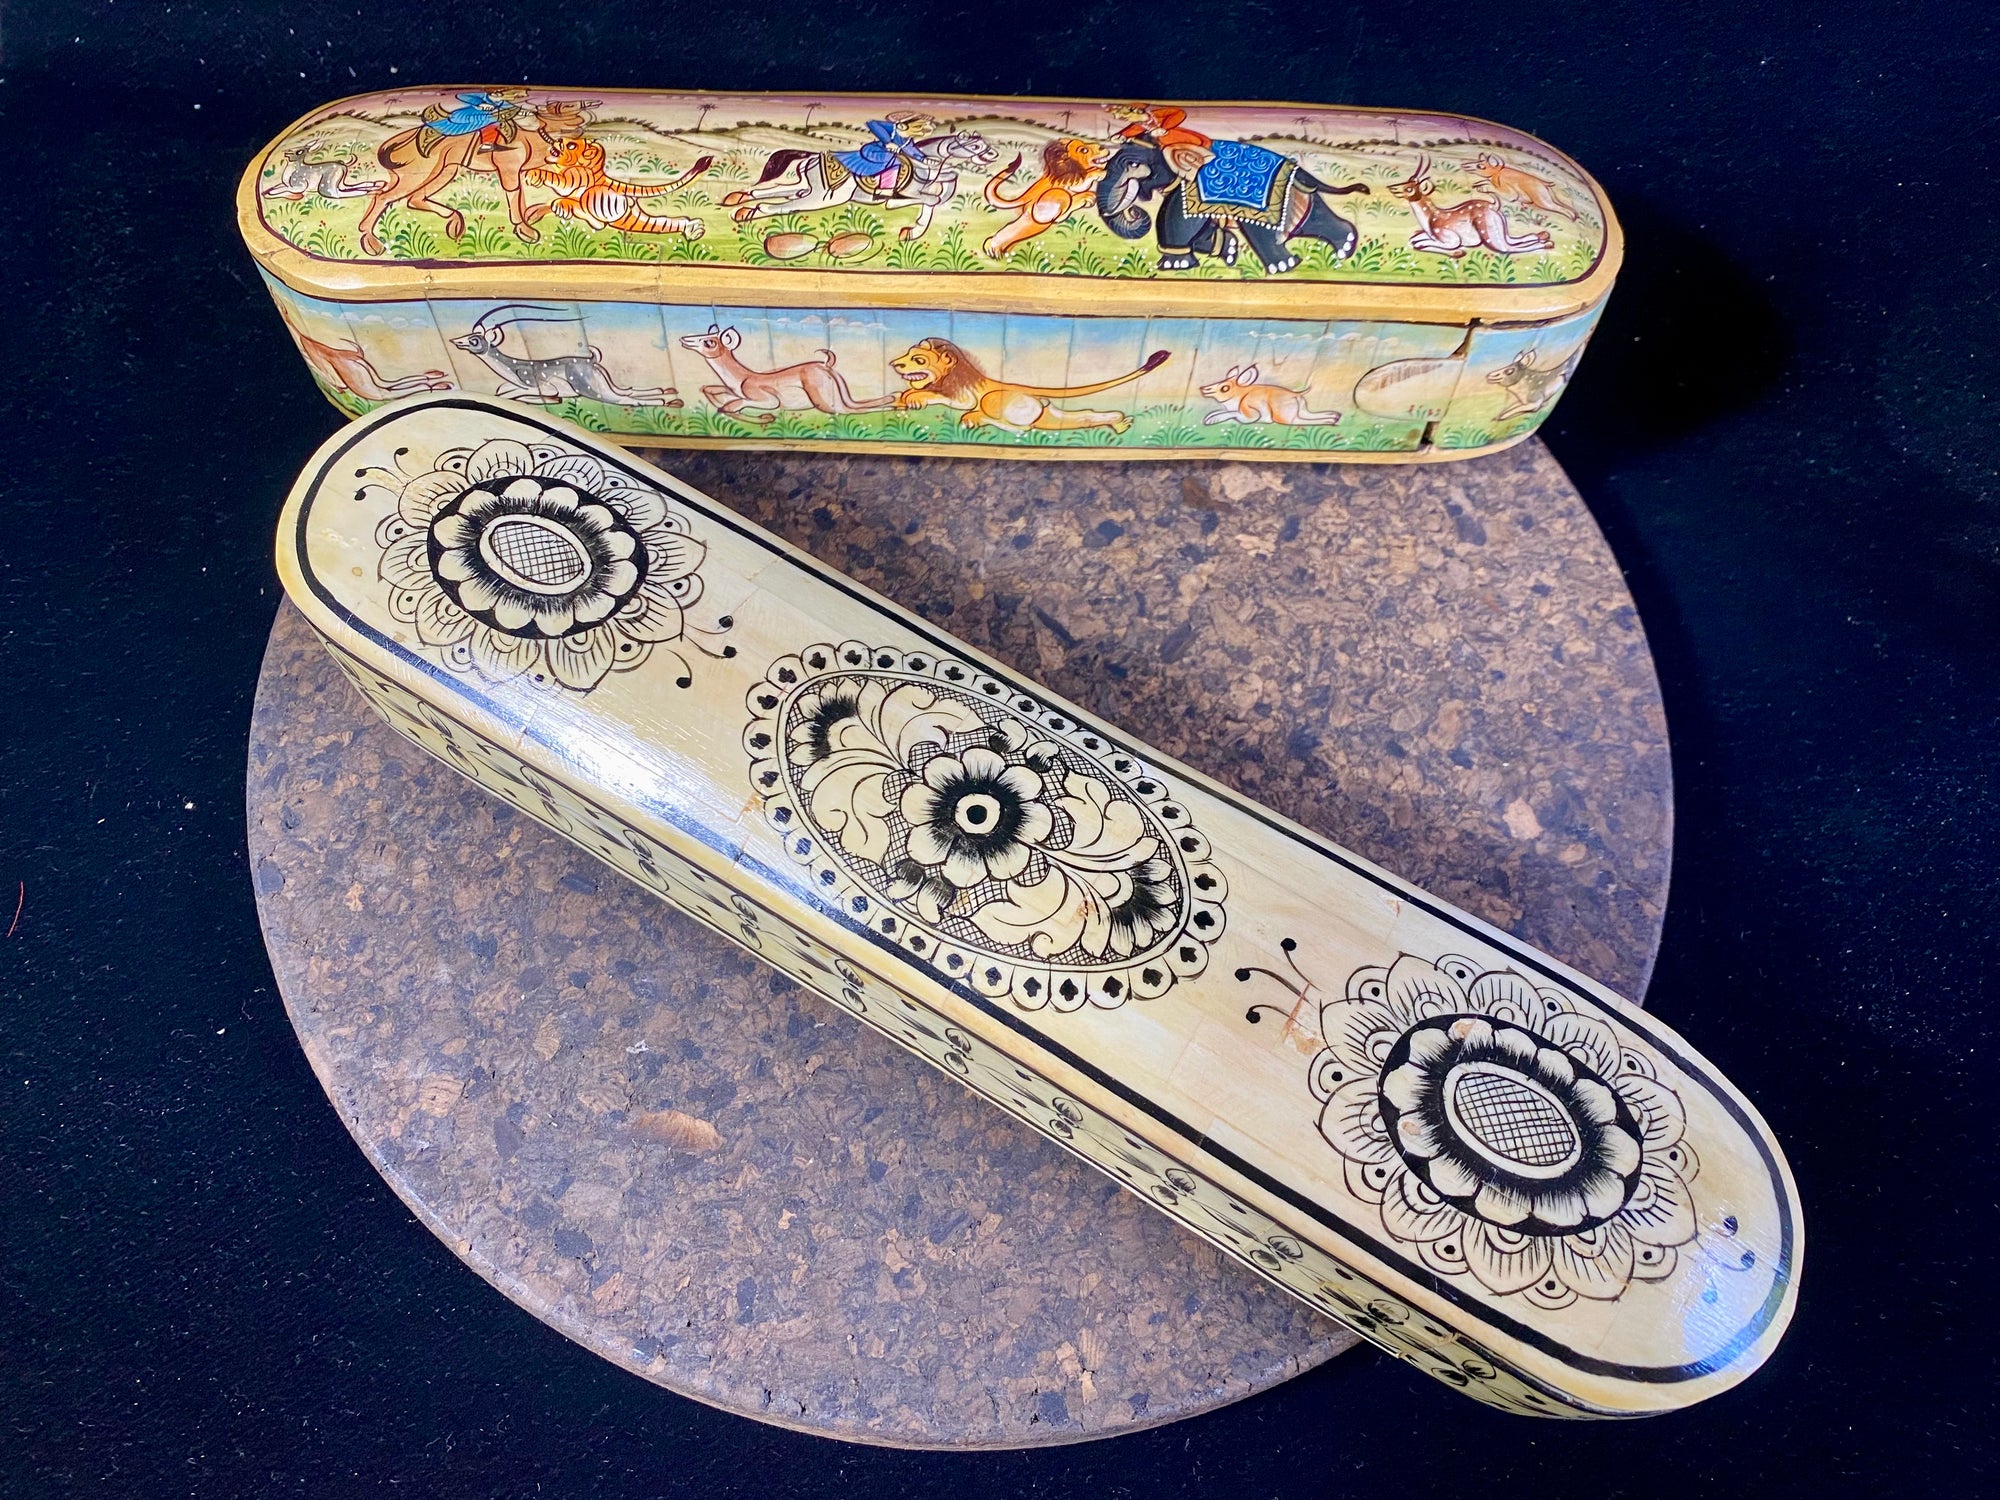 traditional Indian pen boxes. Crafted from panels of camel bone over wood, fitted together then painted with detailed black scroll work. Length 28 cm